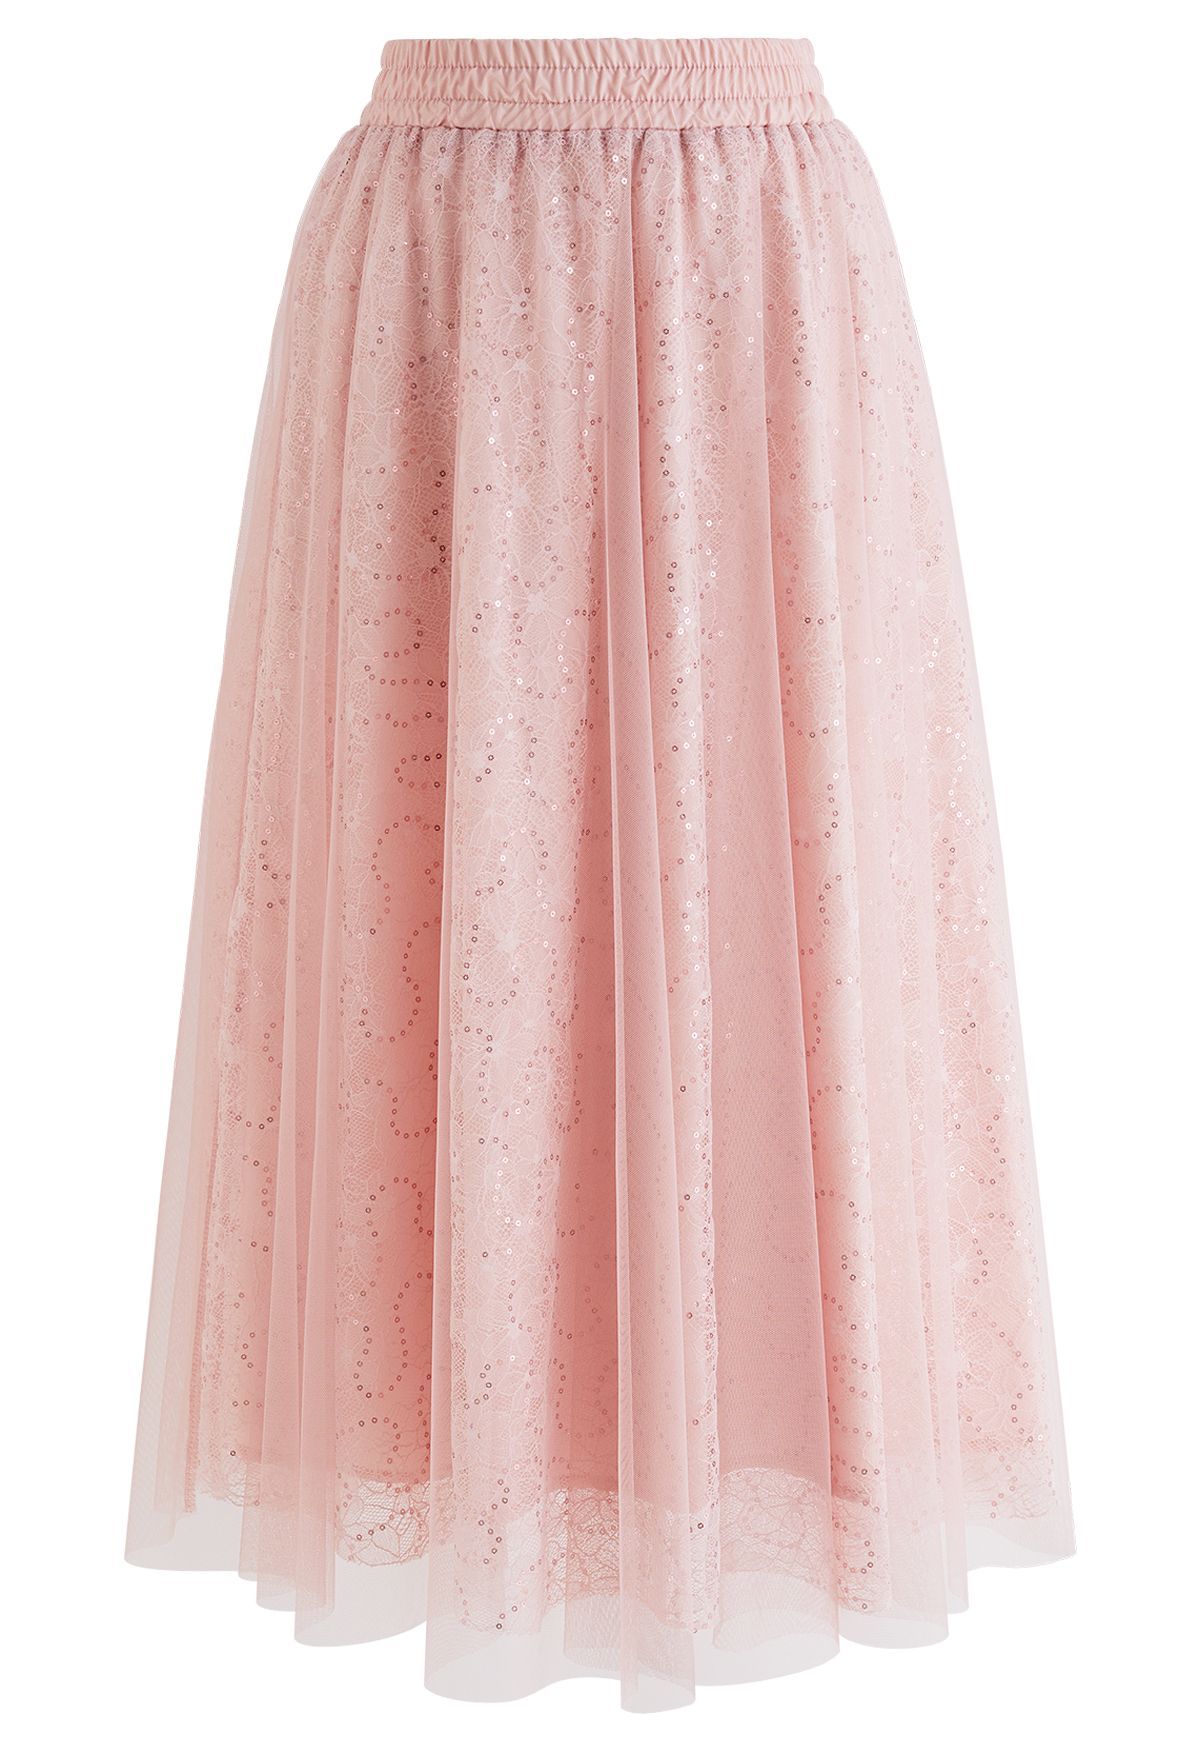 Sequined Floral Lace Mesh Tulle Skirt in Pink | Chicwish